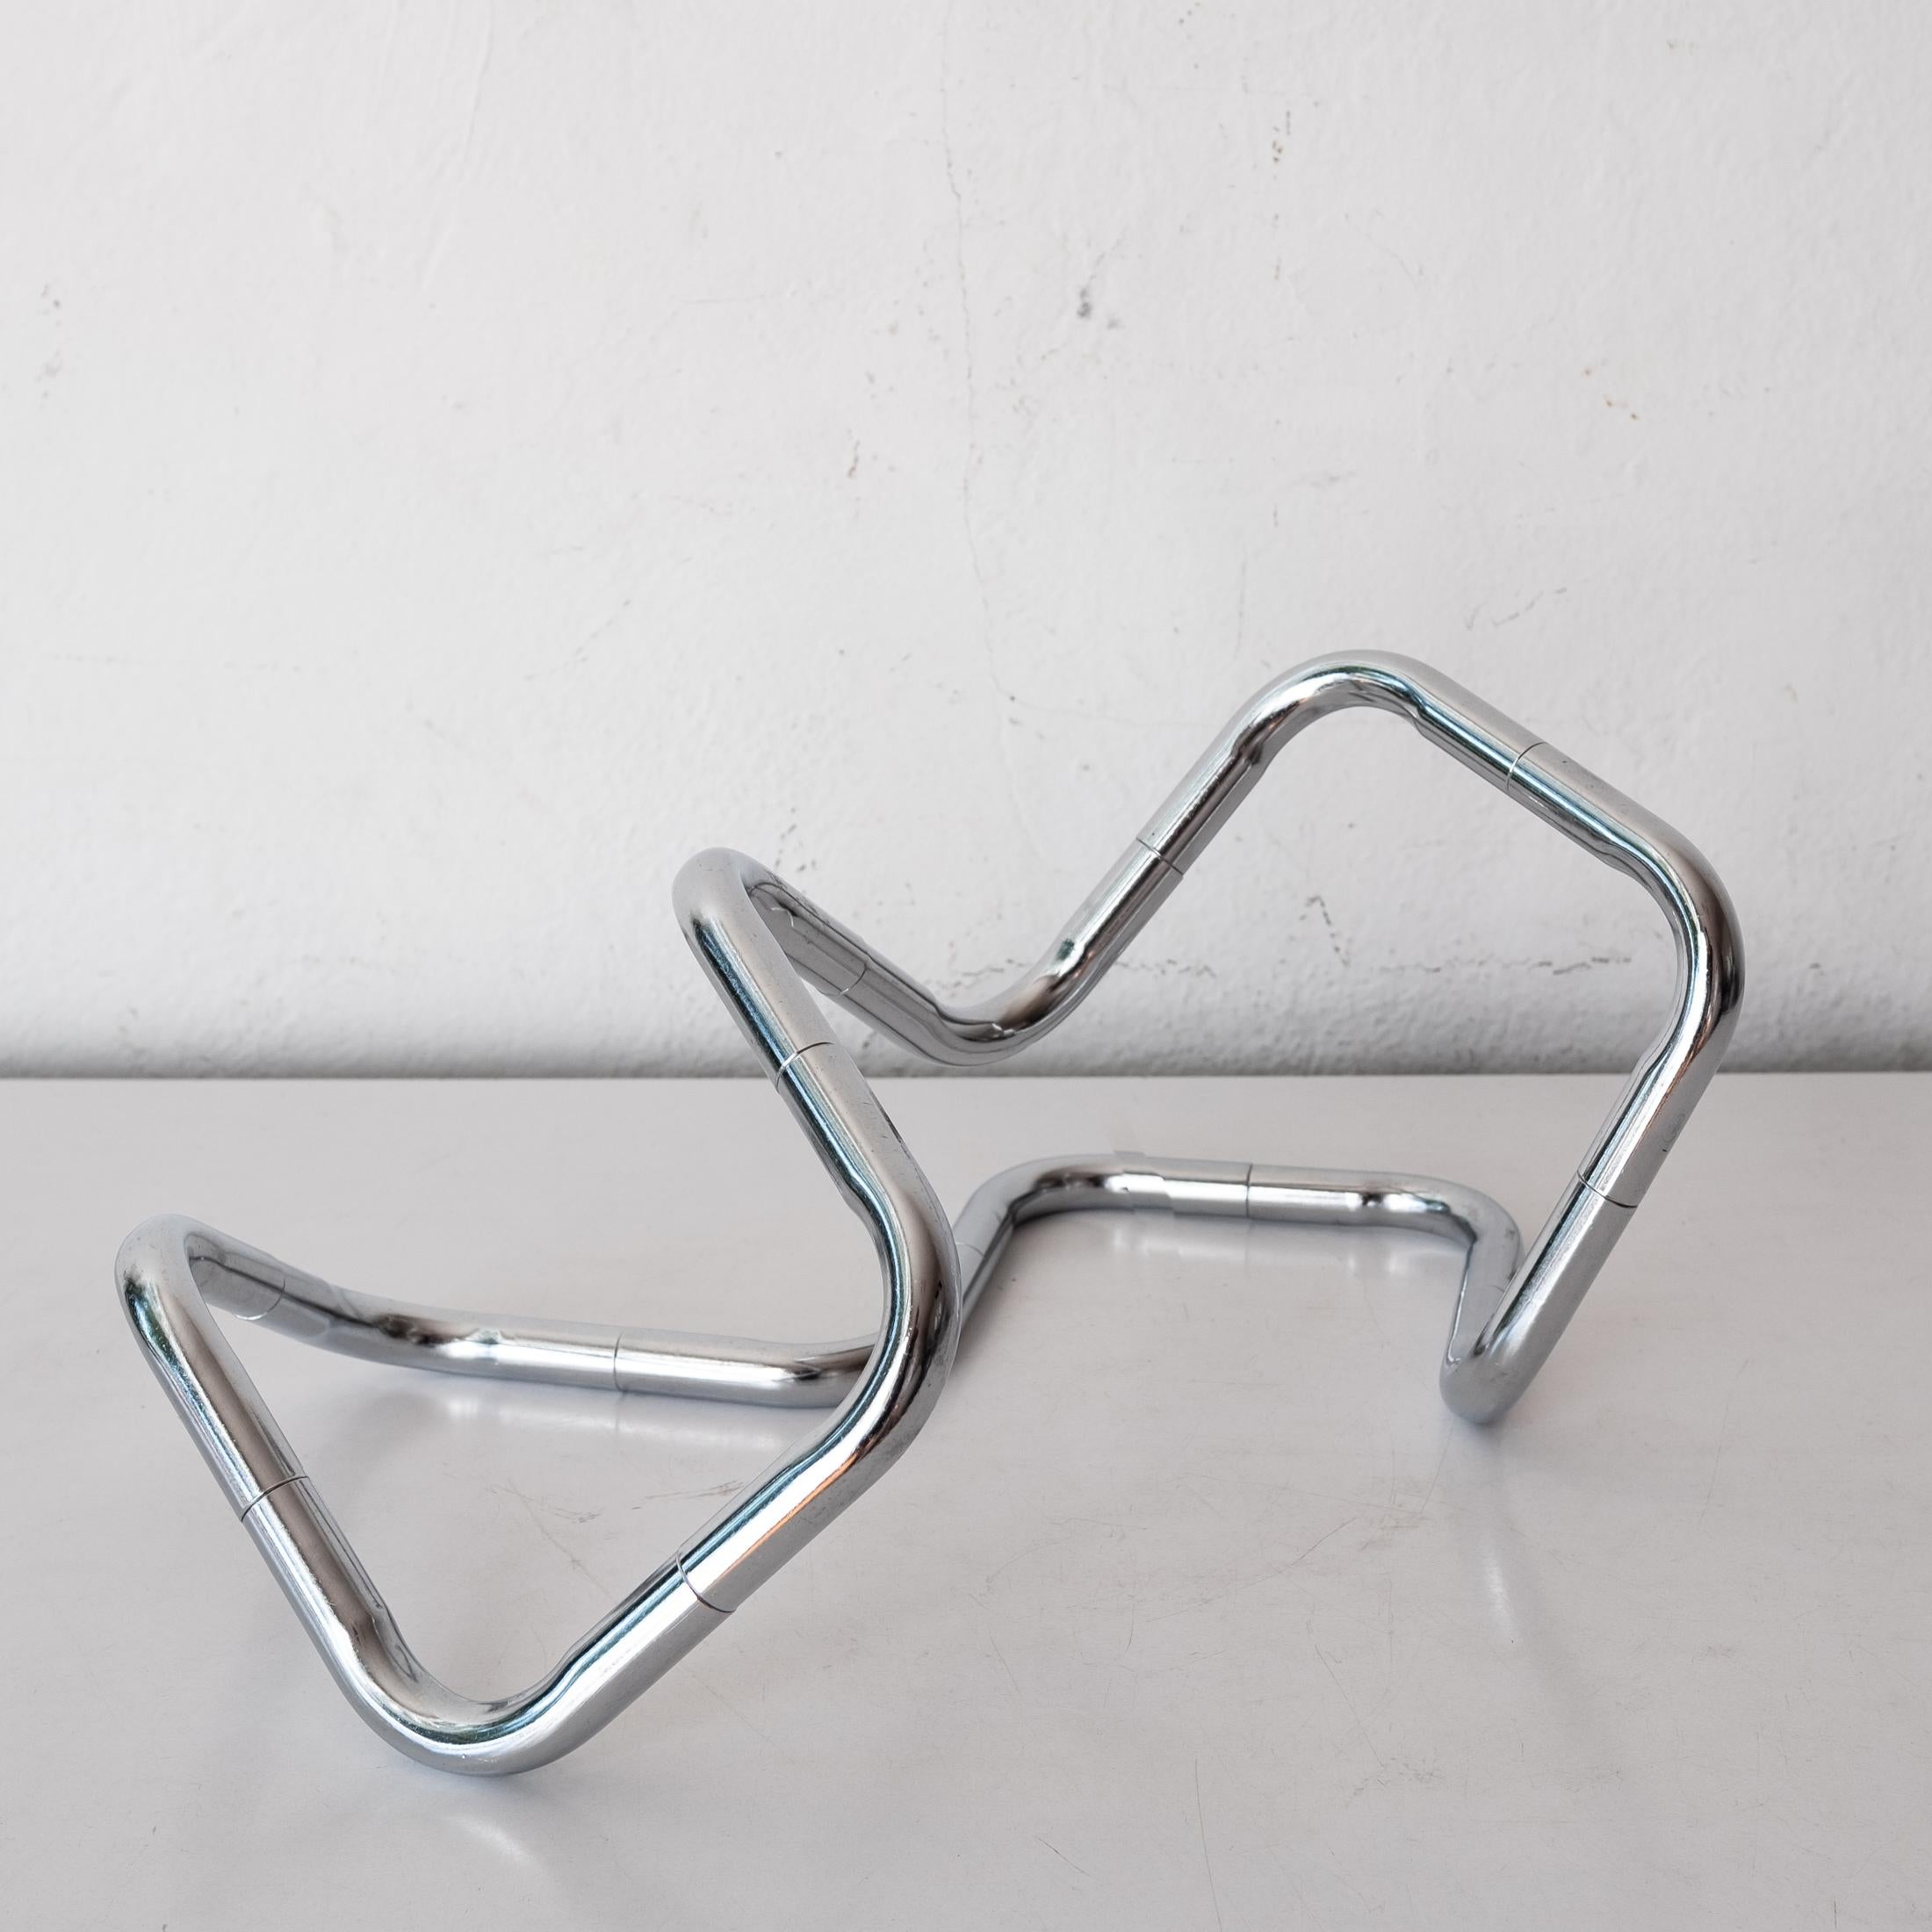 Stainless Steel Modernist Metal Tangle Abstract Kinetic Sculpture